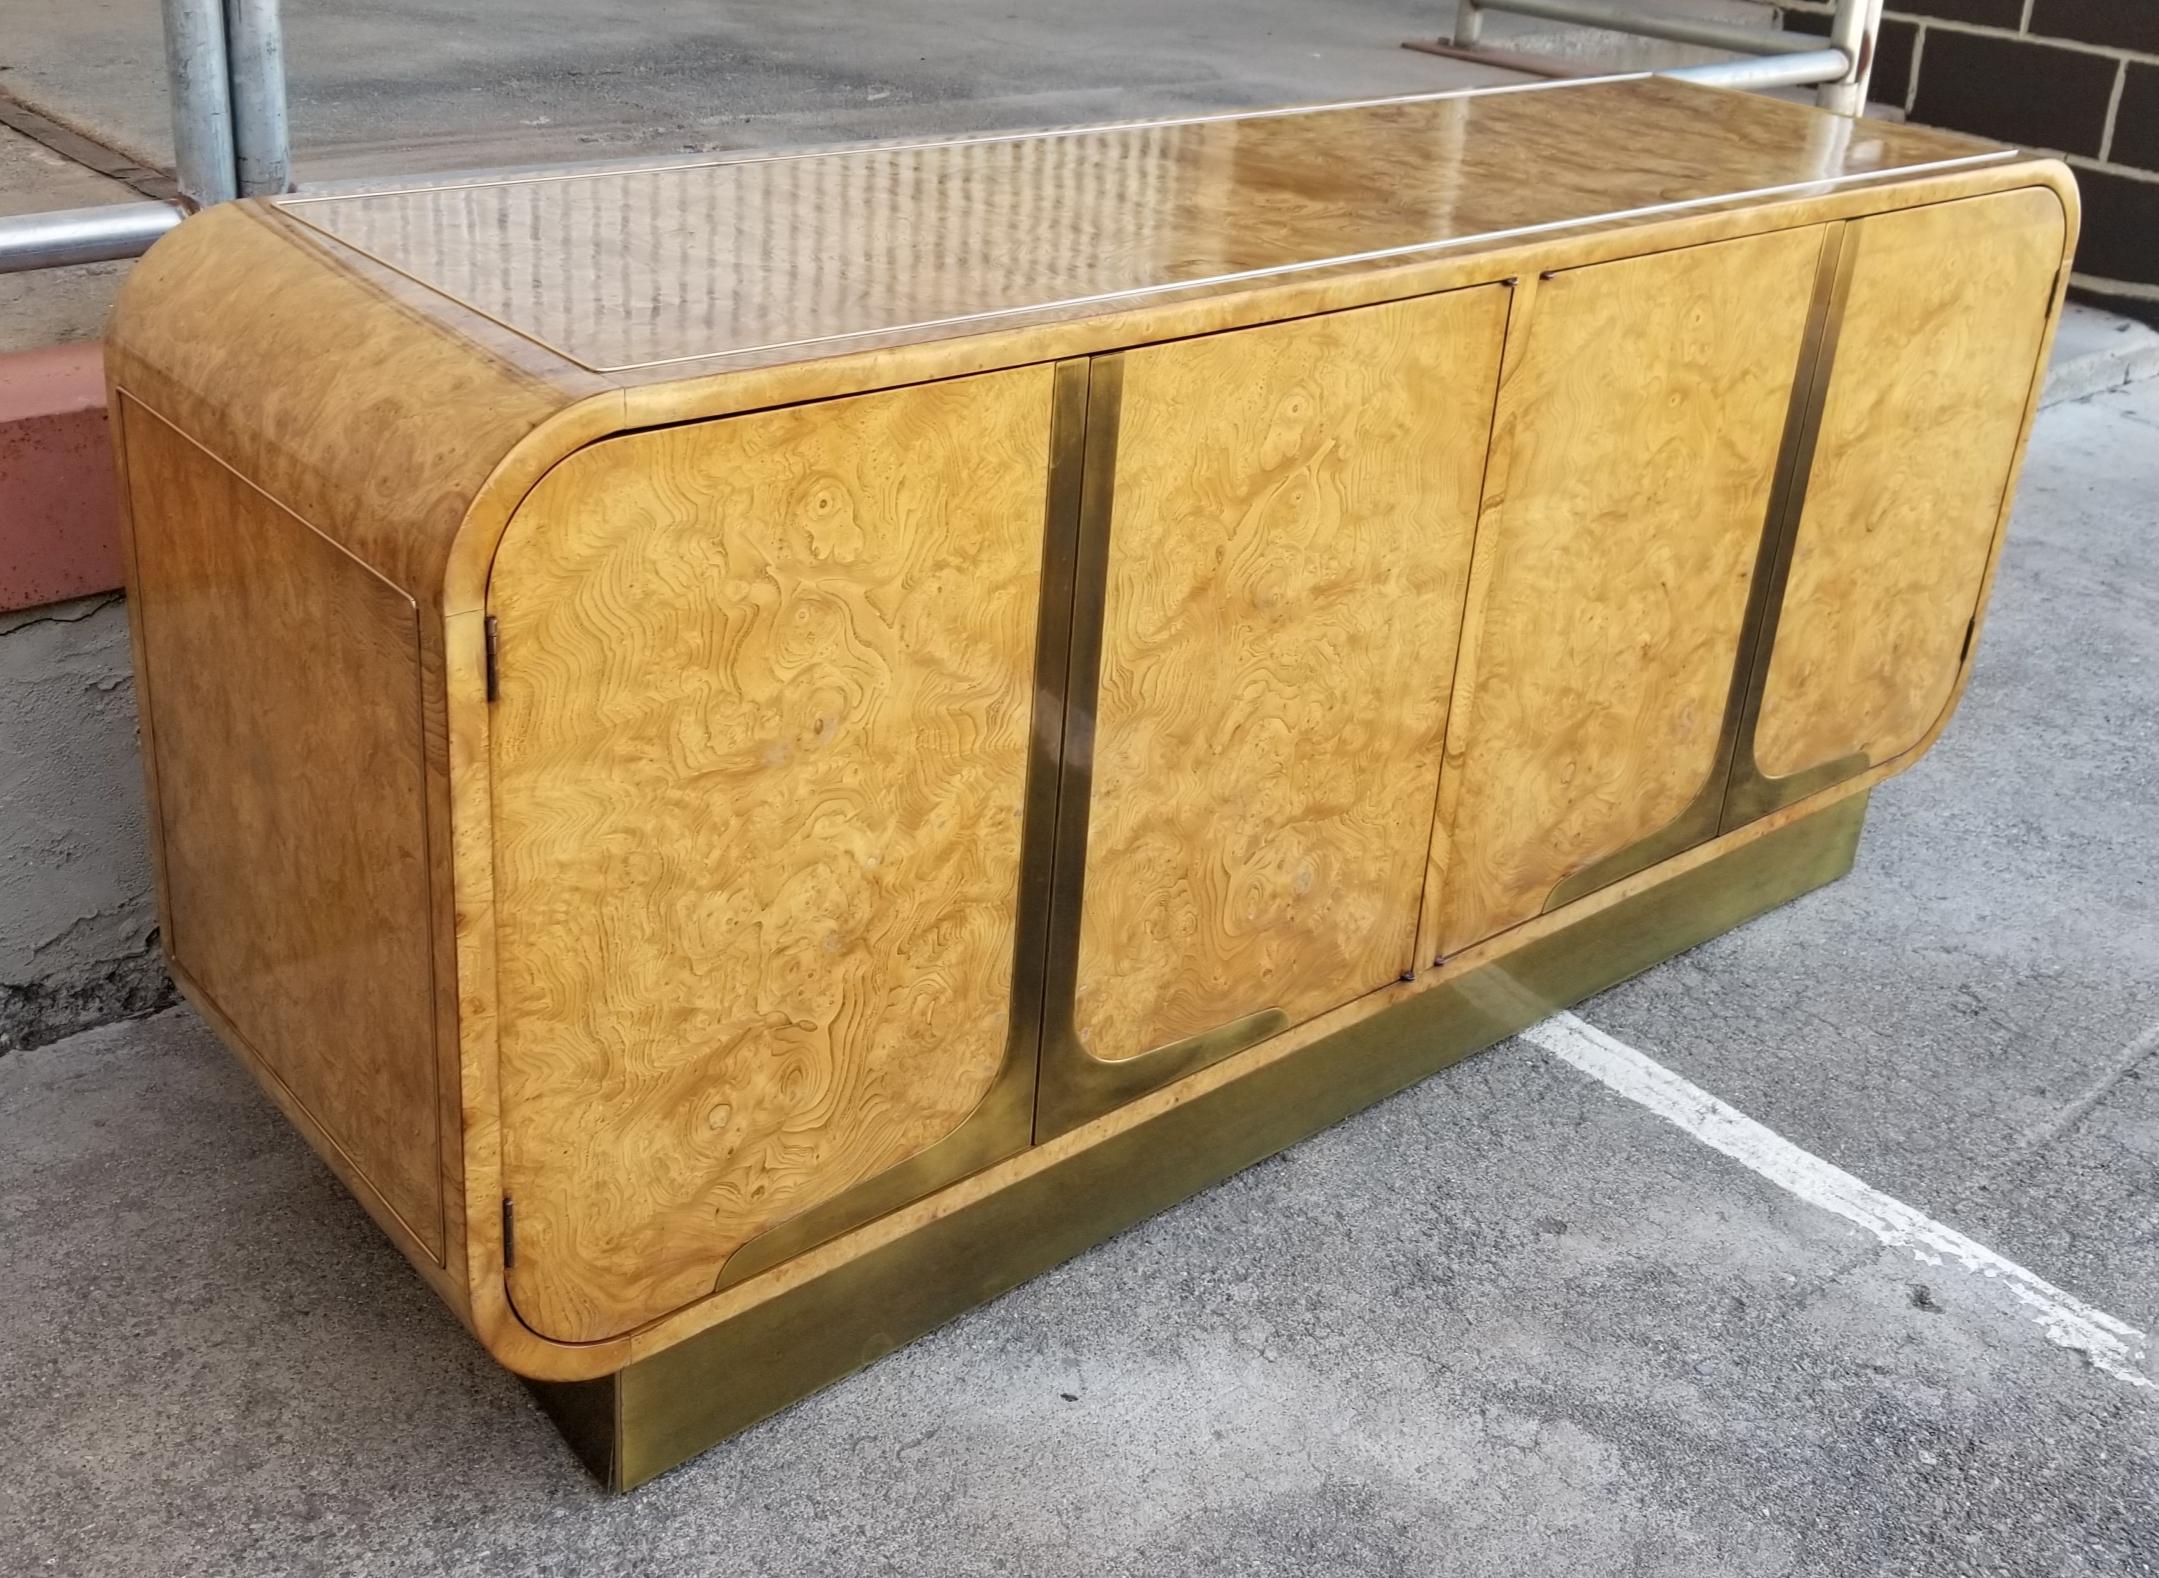 Striking, exotic burl-wood credenza with brass detail. Push and release doors with fitted interior. Mounted to a brass plinth with beautiful curvaceous corners. Designed by Wiliam Doezema for Mastercraft Furniture.